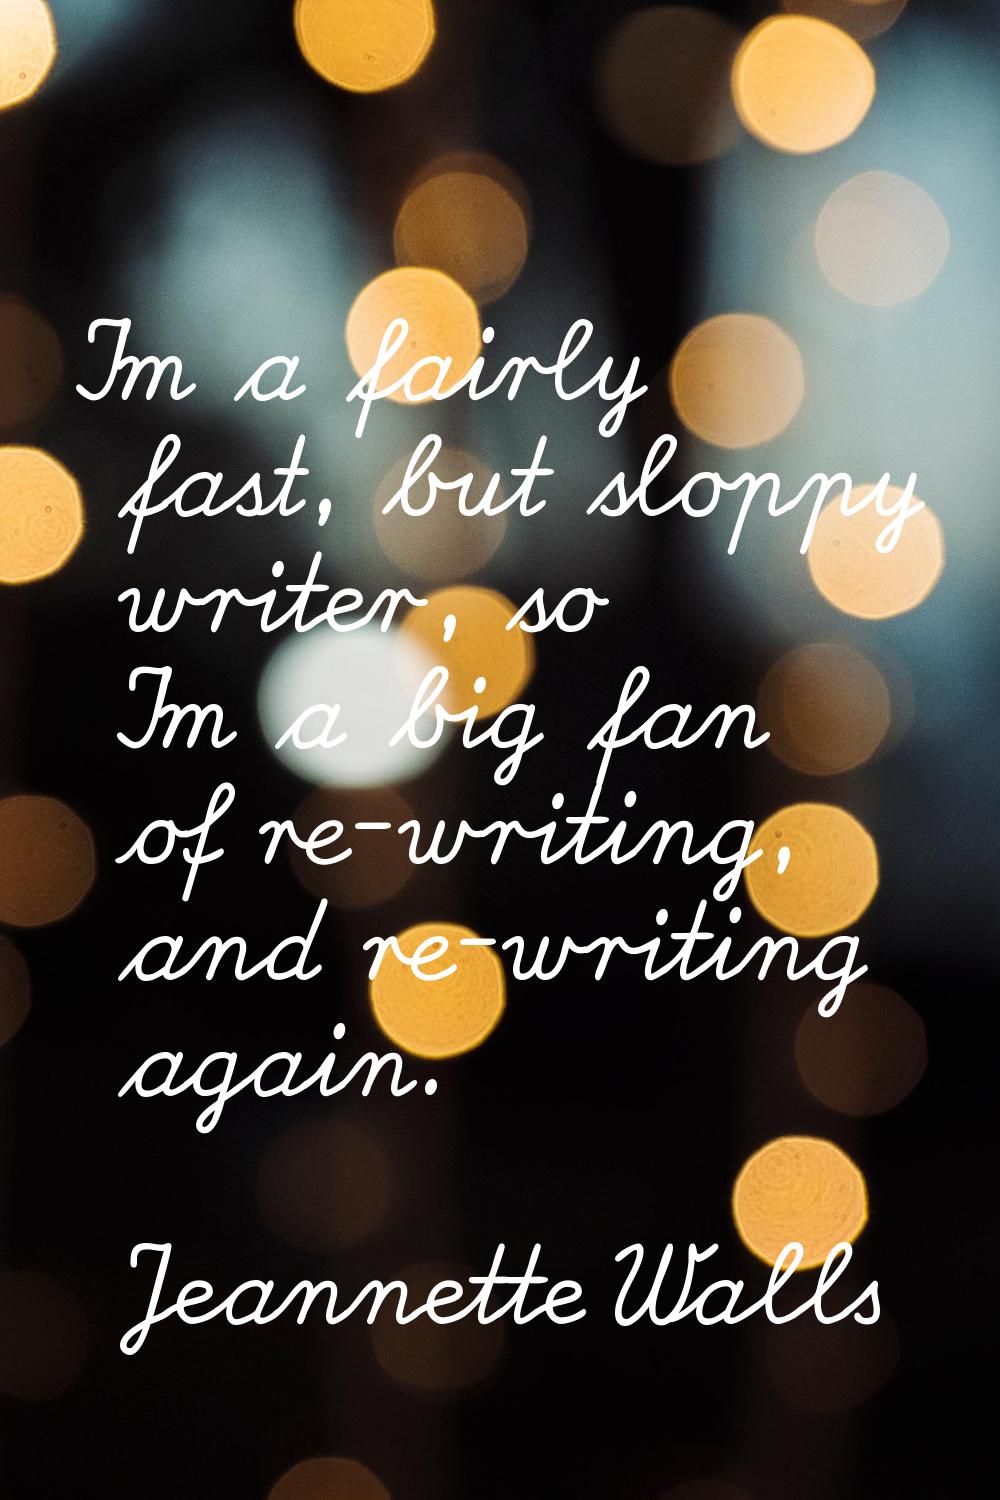 I'm a fairly fast, but sloppy writer, so I'm a big fan of re-writing, and re-writing again.